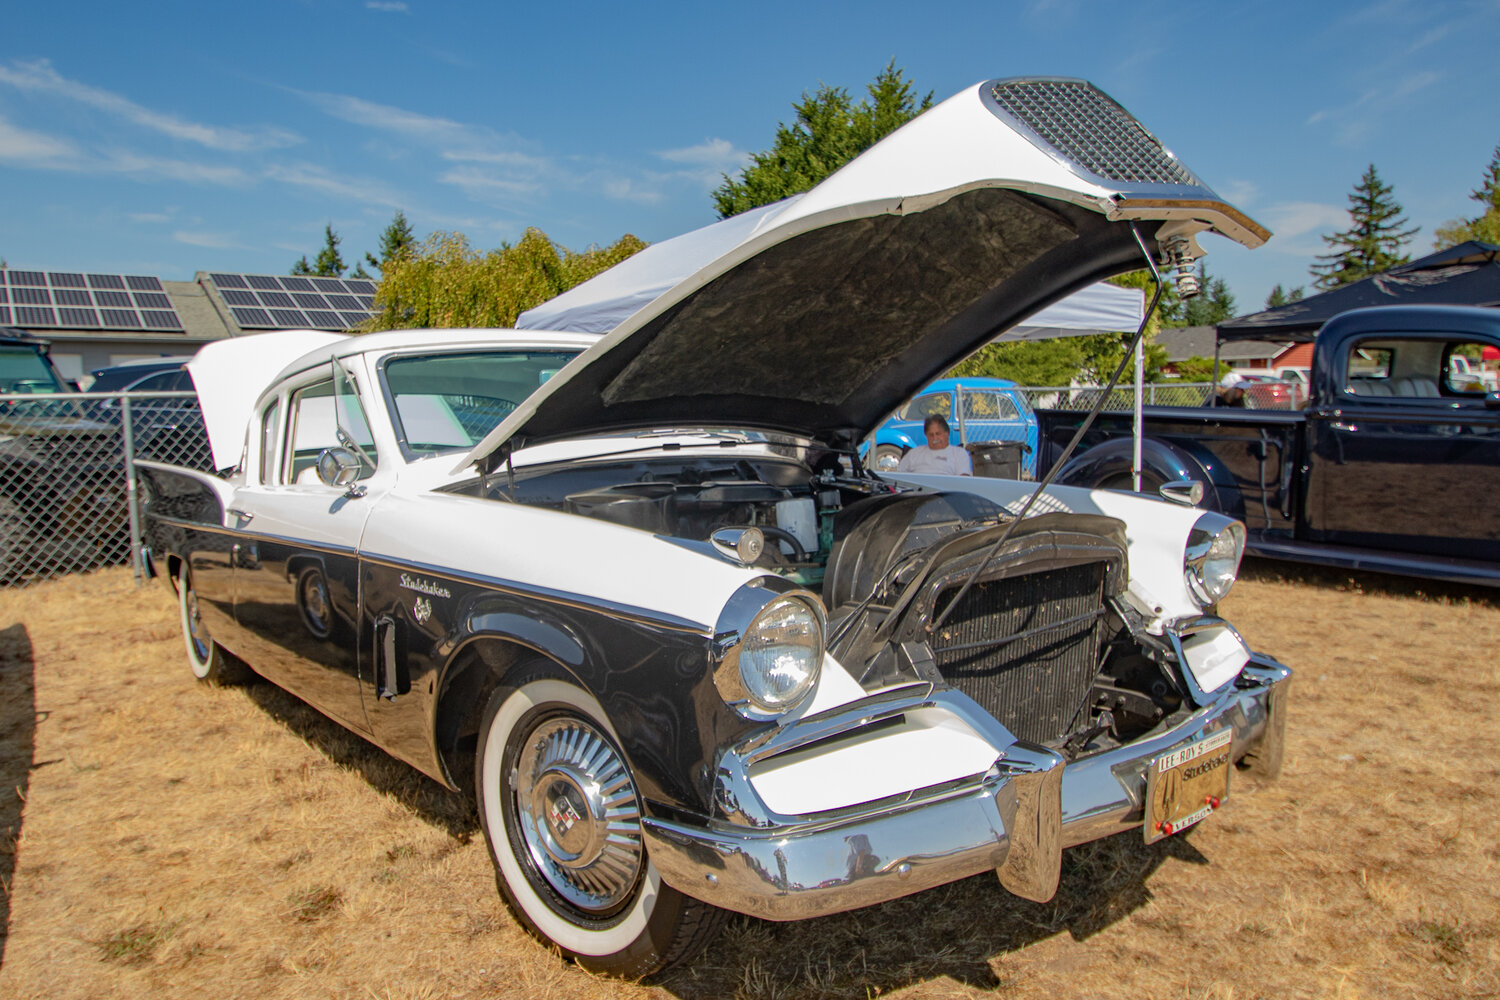 Noelee Jordan of Roy’s 1957 Studebaker President Silver Hawk is parked on display at the 16th annual Military Heroes Car Show on Saturday, Sept. 2, at Wilkowski Park in Rainier.